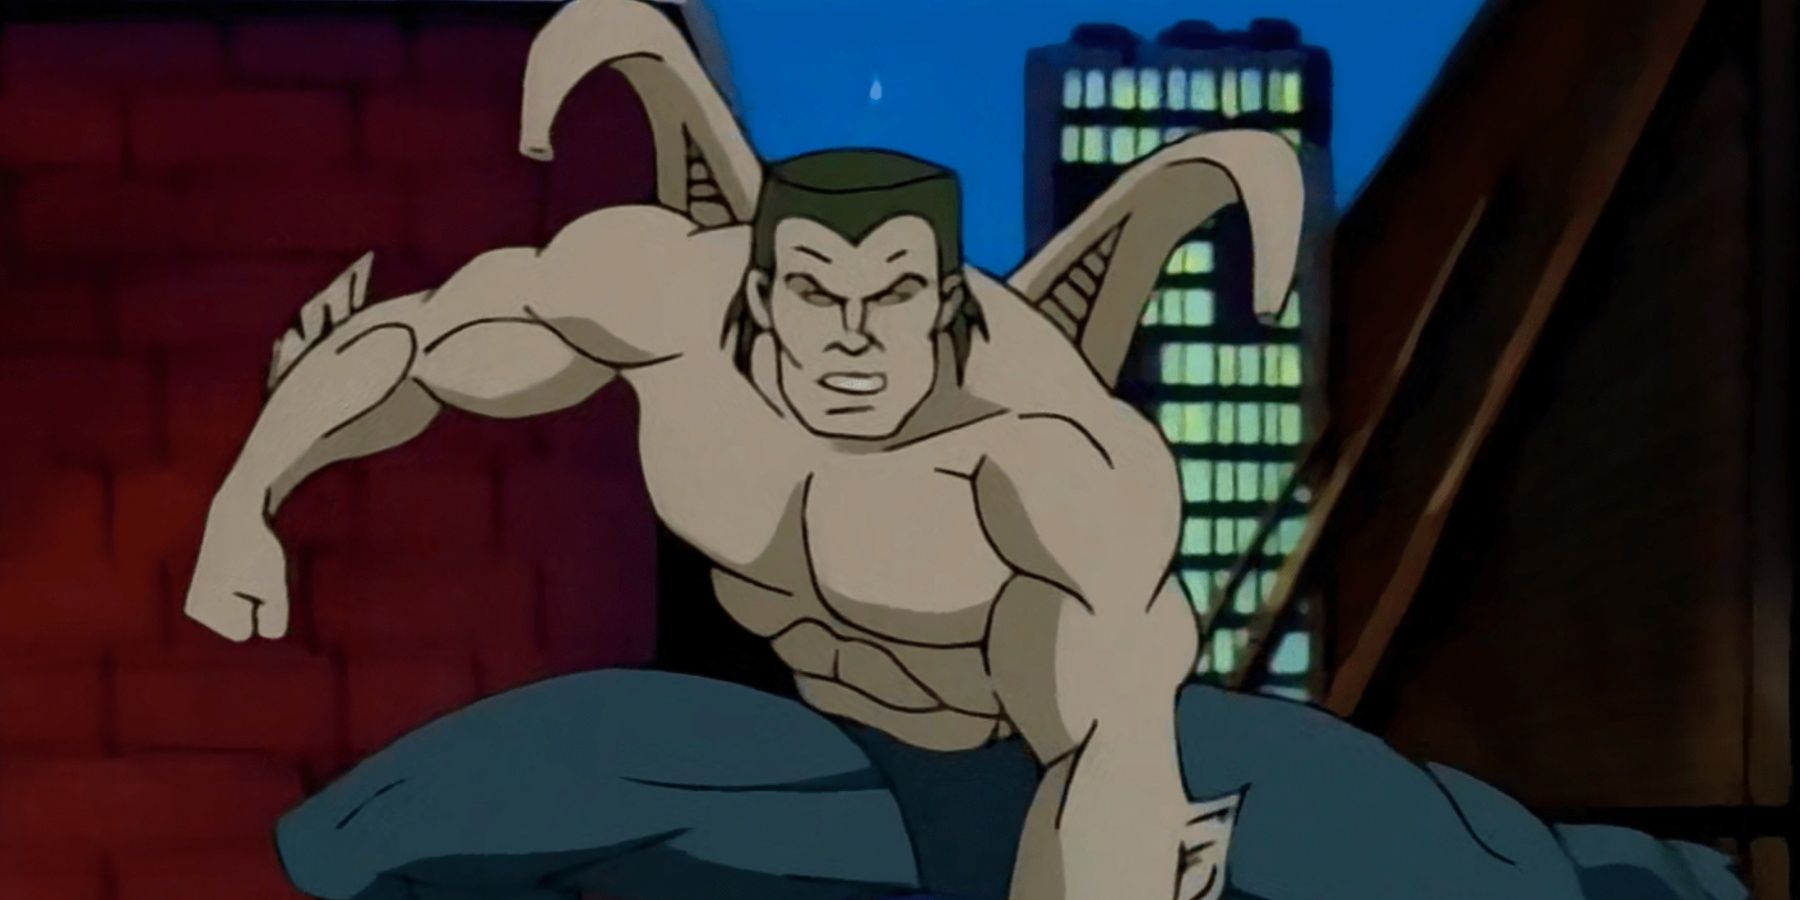 Alistair Smythe strikes a pose in the Spider-Man animated series